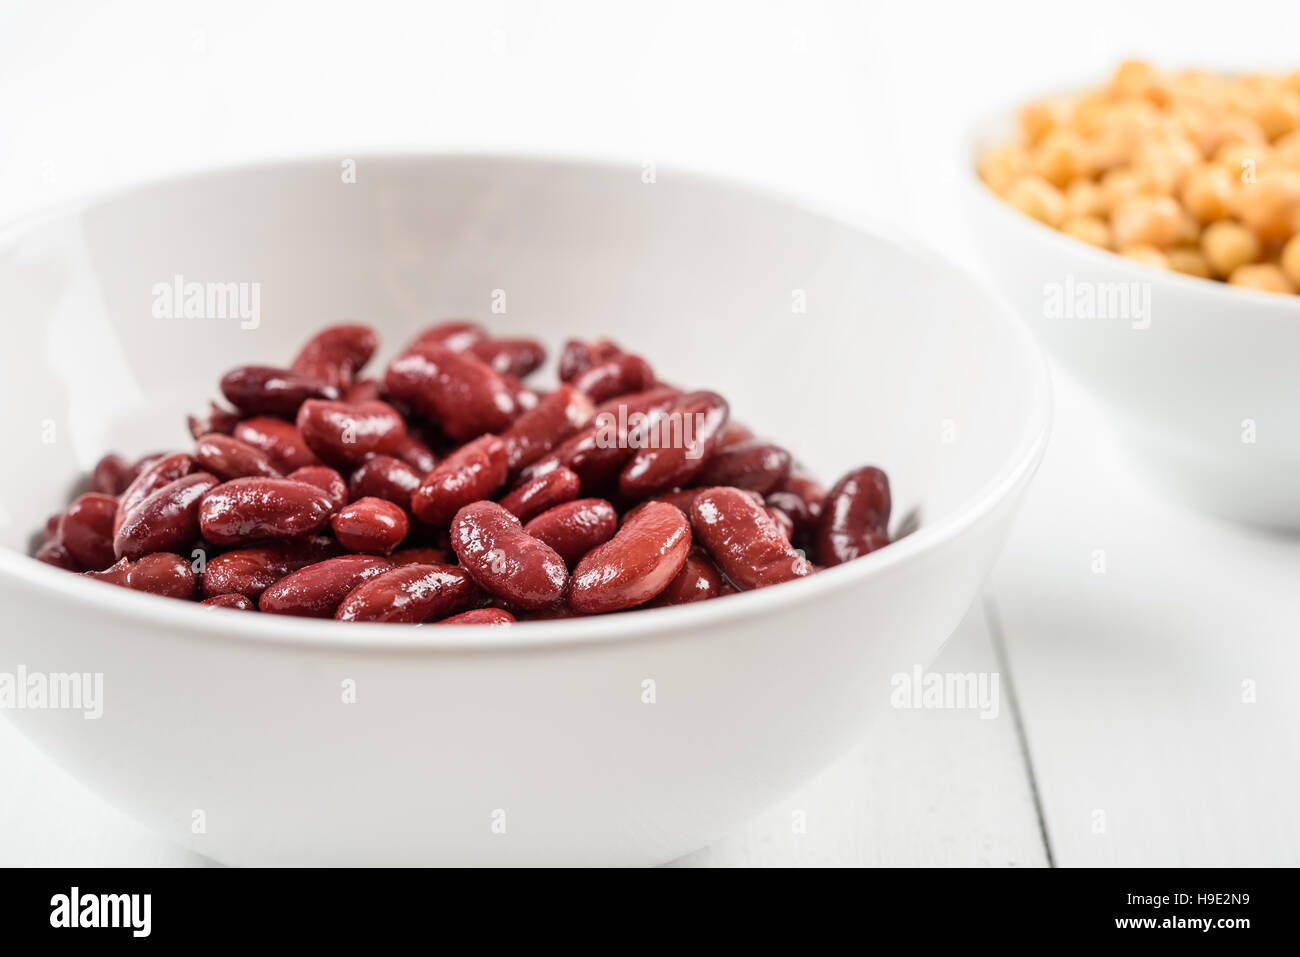 Canned Red Kidney Beans And Chickpeas Stock Photo